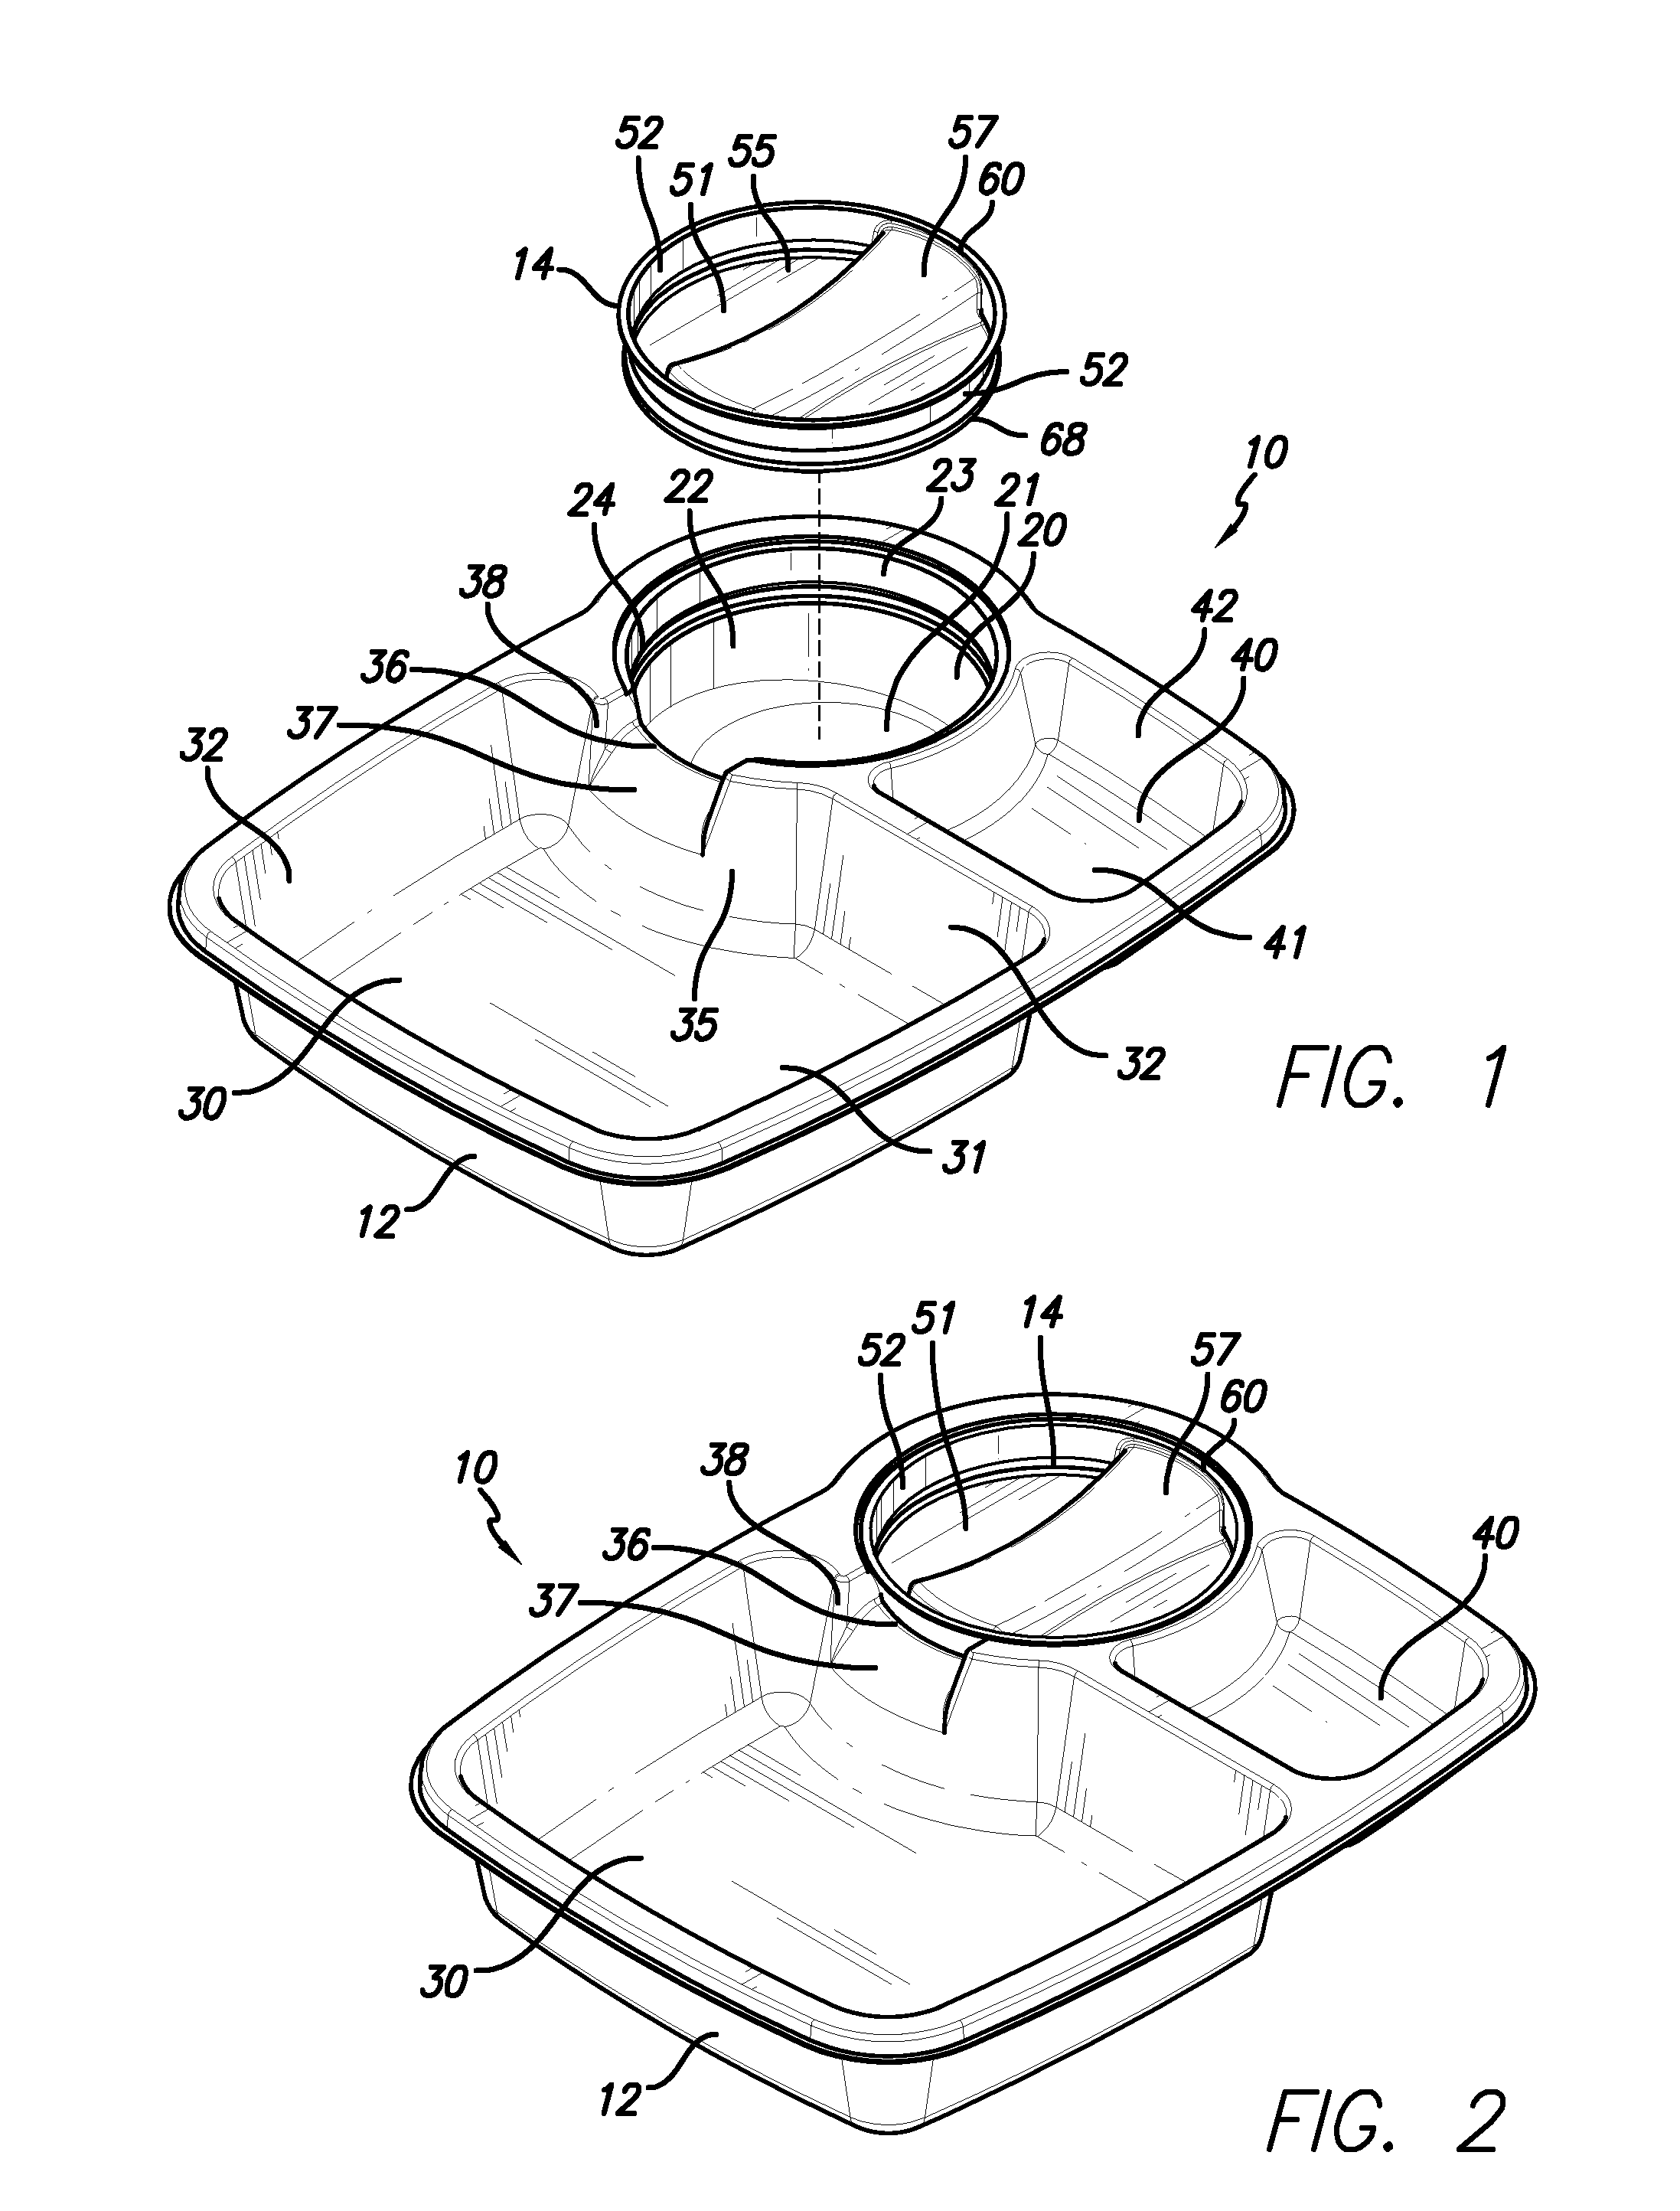 Snack tray with dispensing compartment